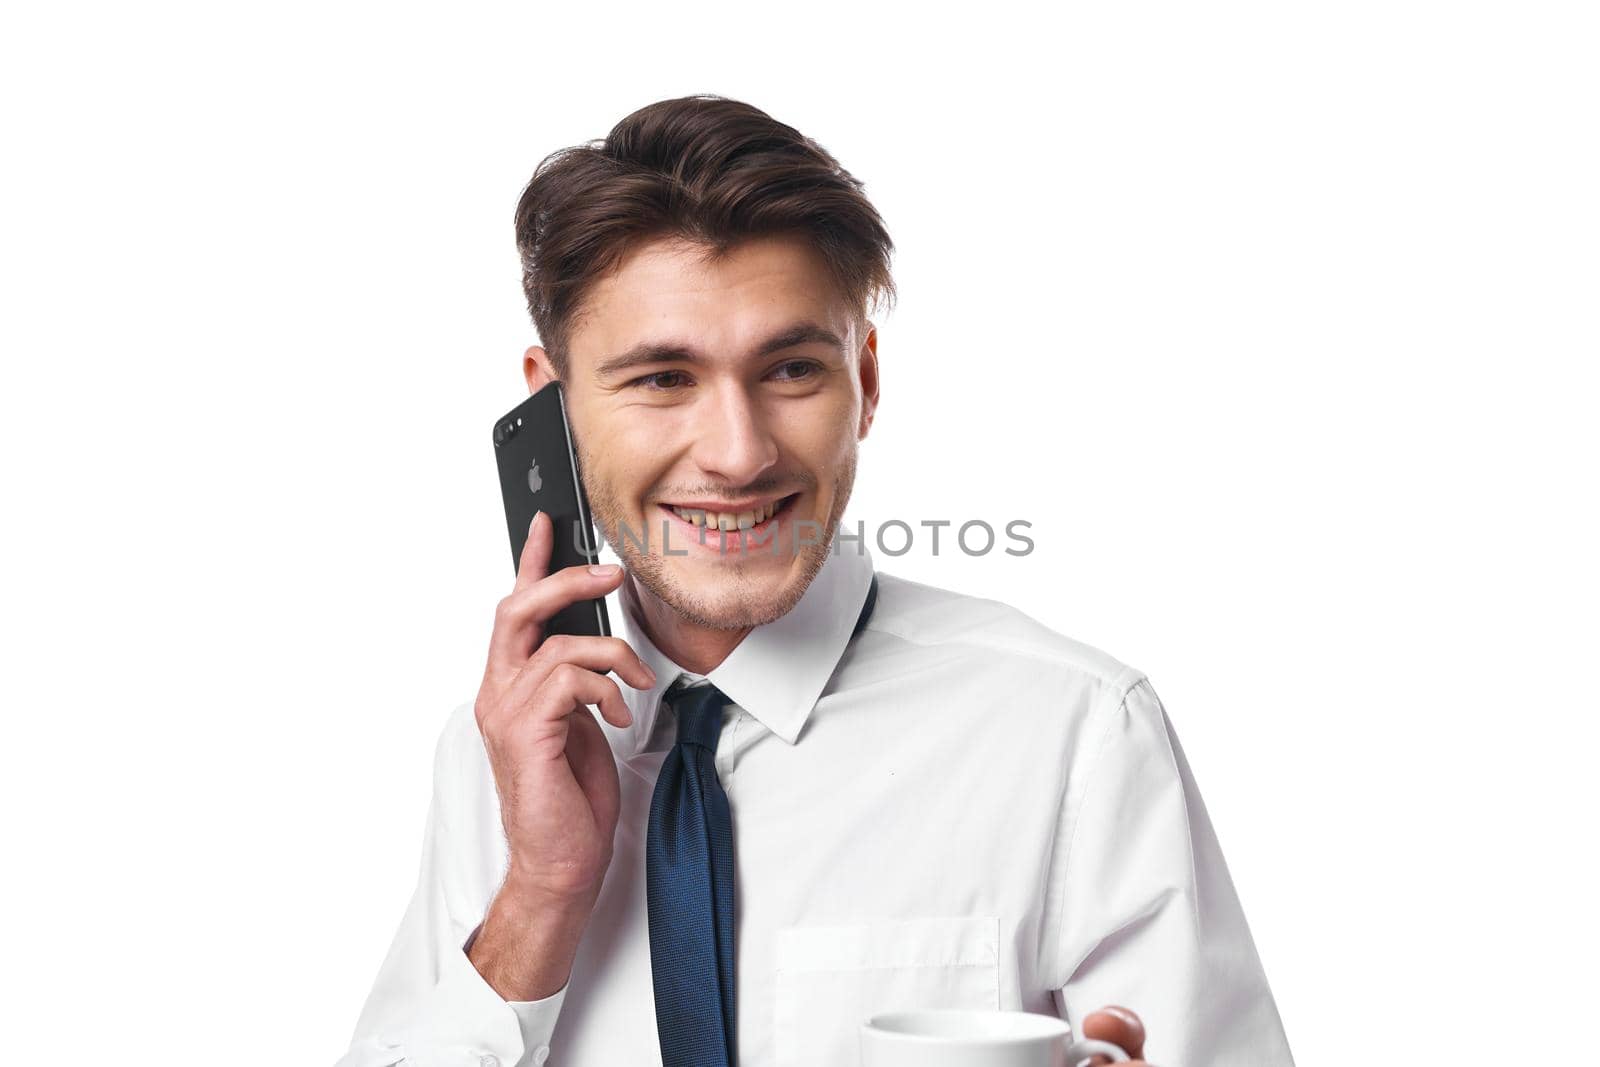 man phone communication success work office isolated background by Vichizh